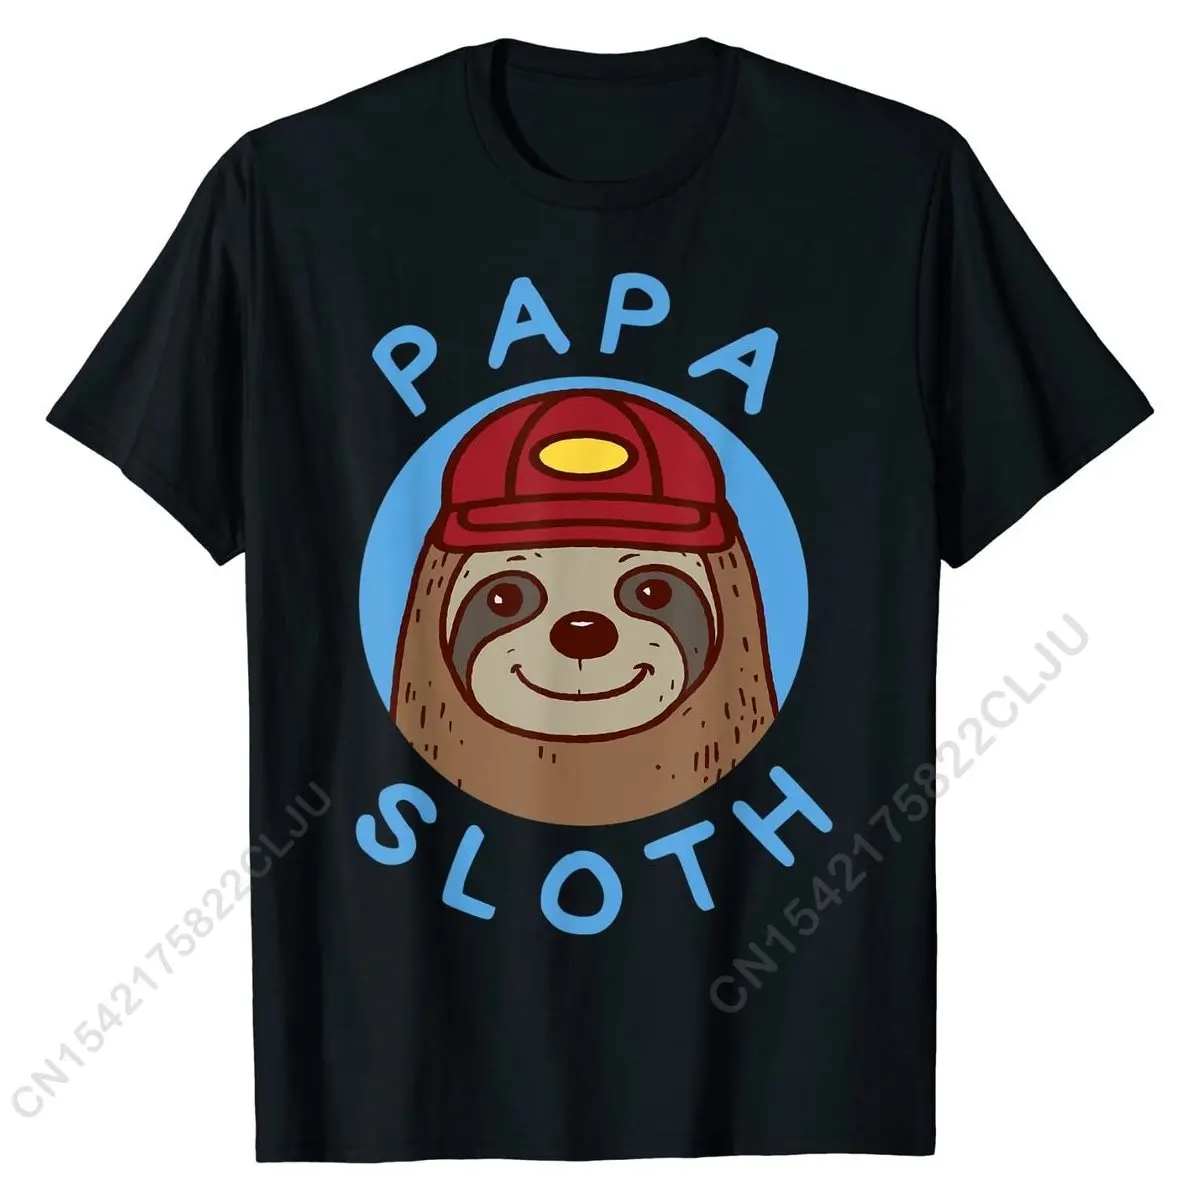 

Funny Dad Shirt Papa Sloth Lover Daddy Fathers Day Gift Pops T-Shirt UniqueComics Tops Shirts Funny Cotton Men's Top T-shirts